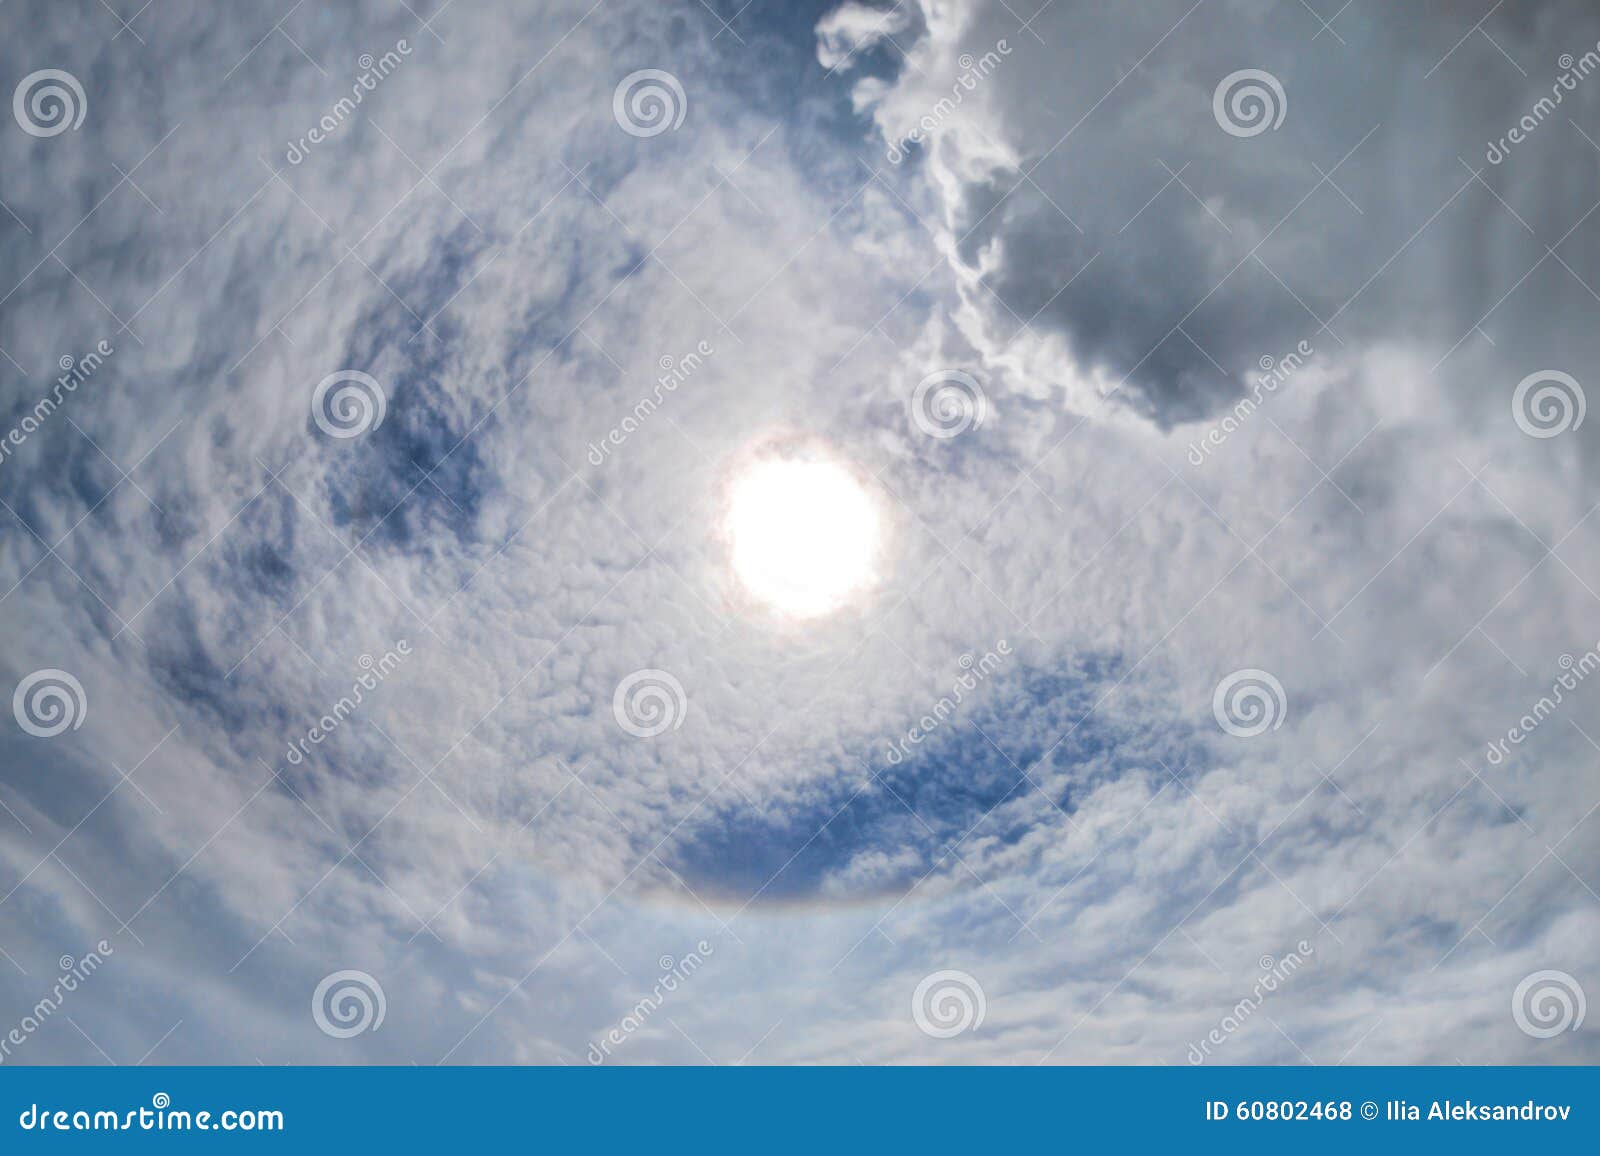 Sun Halo. Rainbow In The Skies. Spiral Clouds. Stock Photo ...